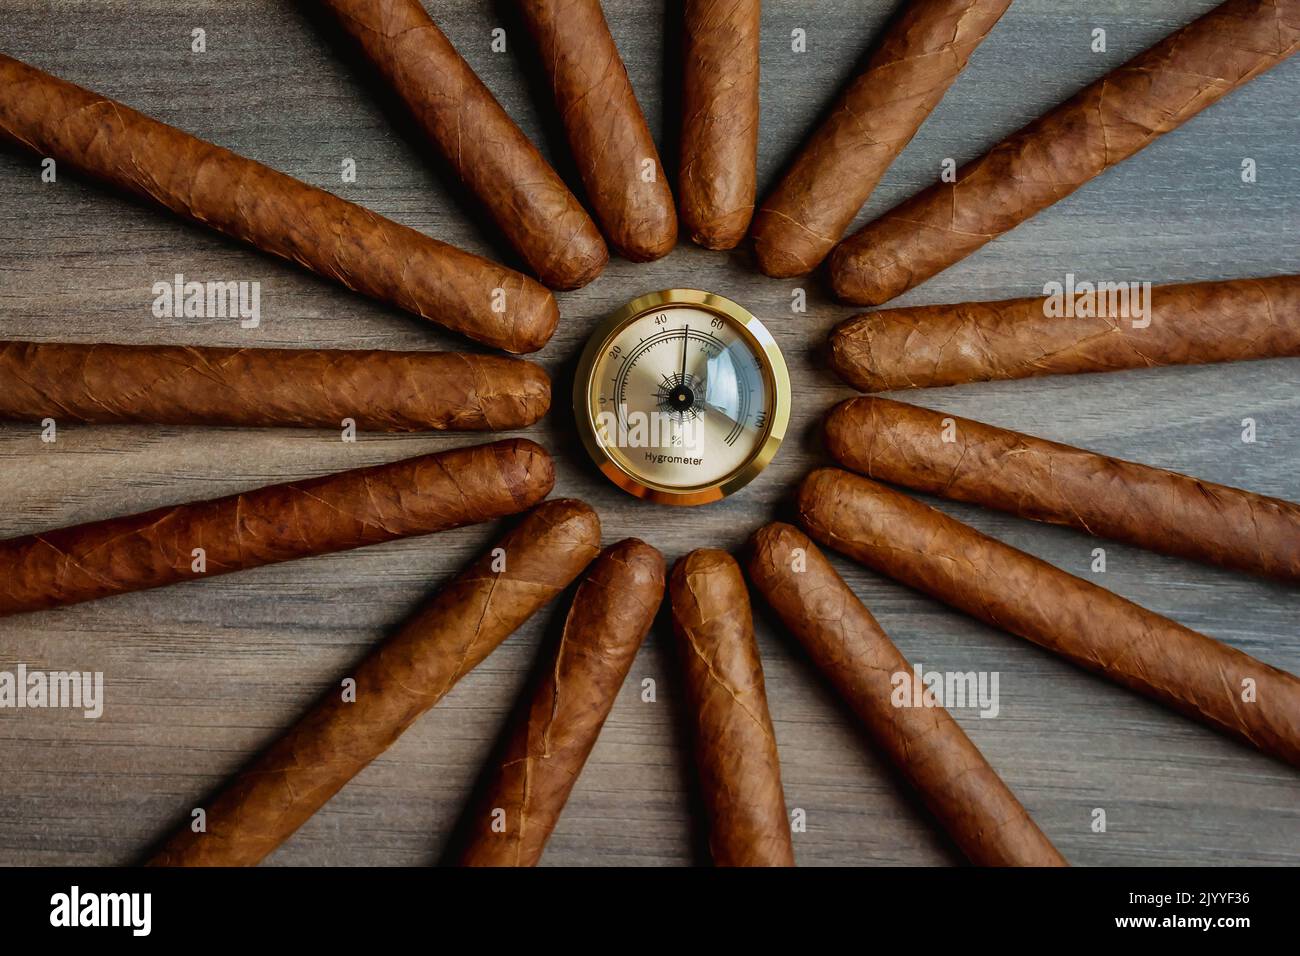 Pile of cigars with humidor hygrometer on the wooden background Stock Photo